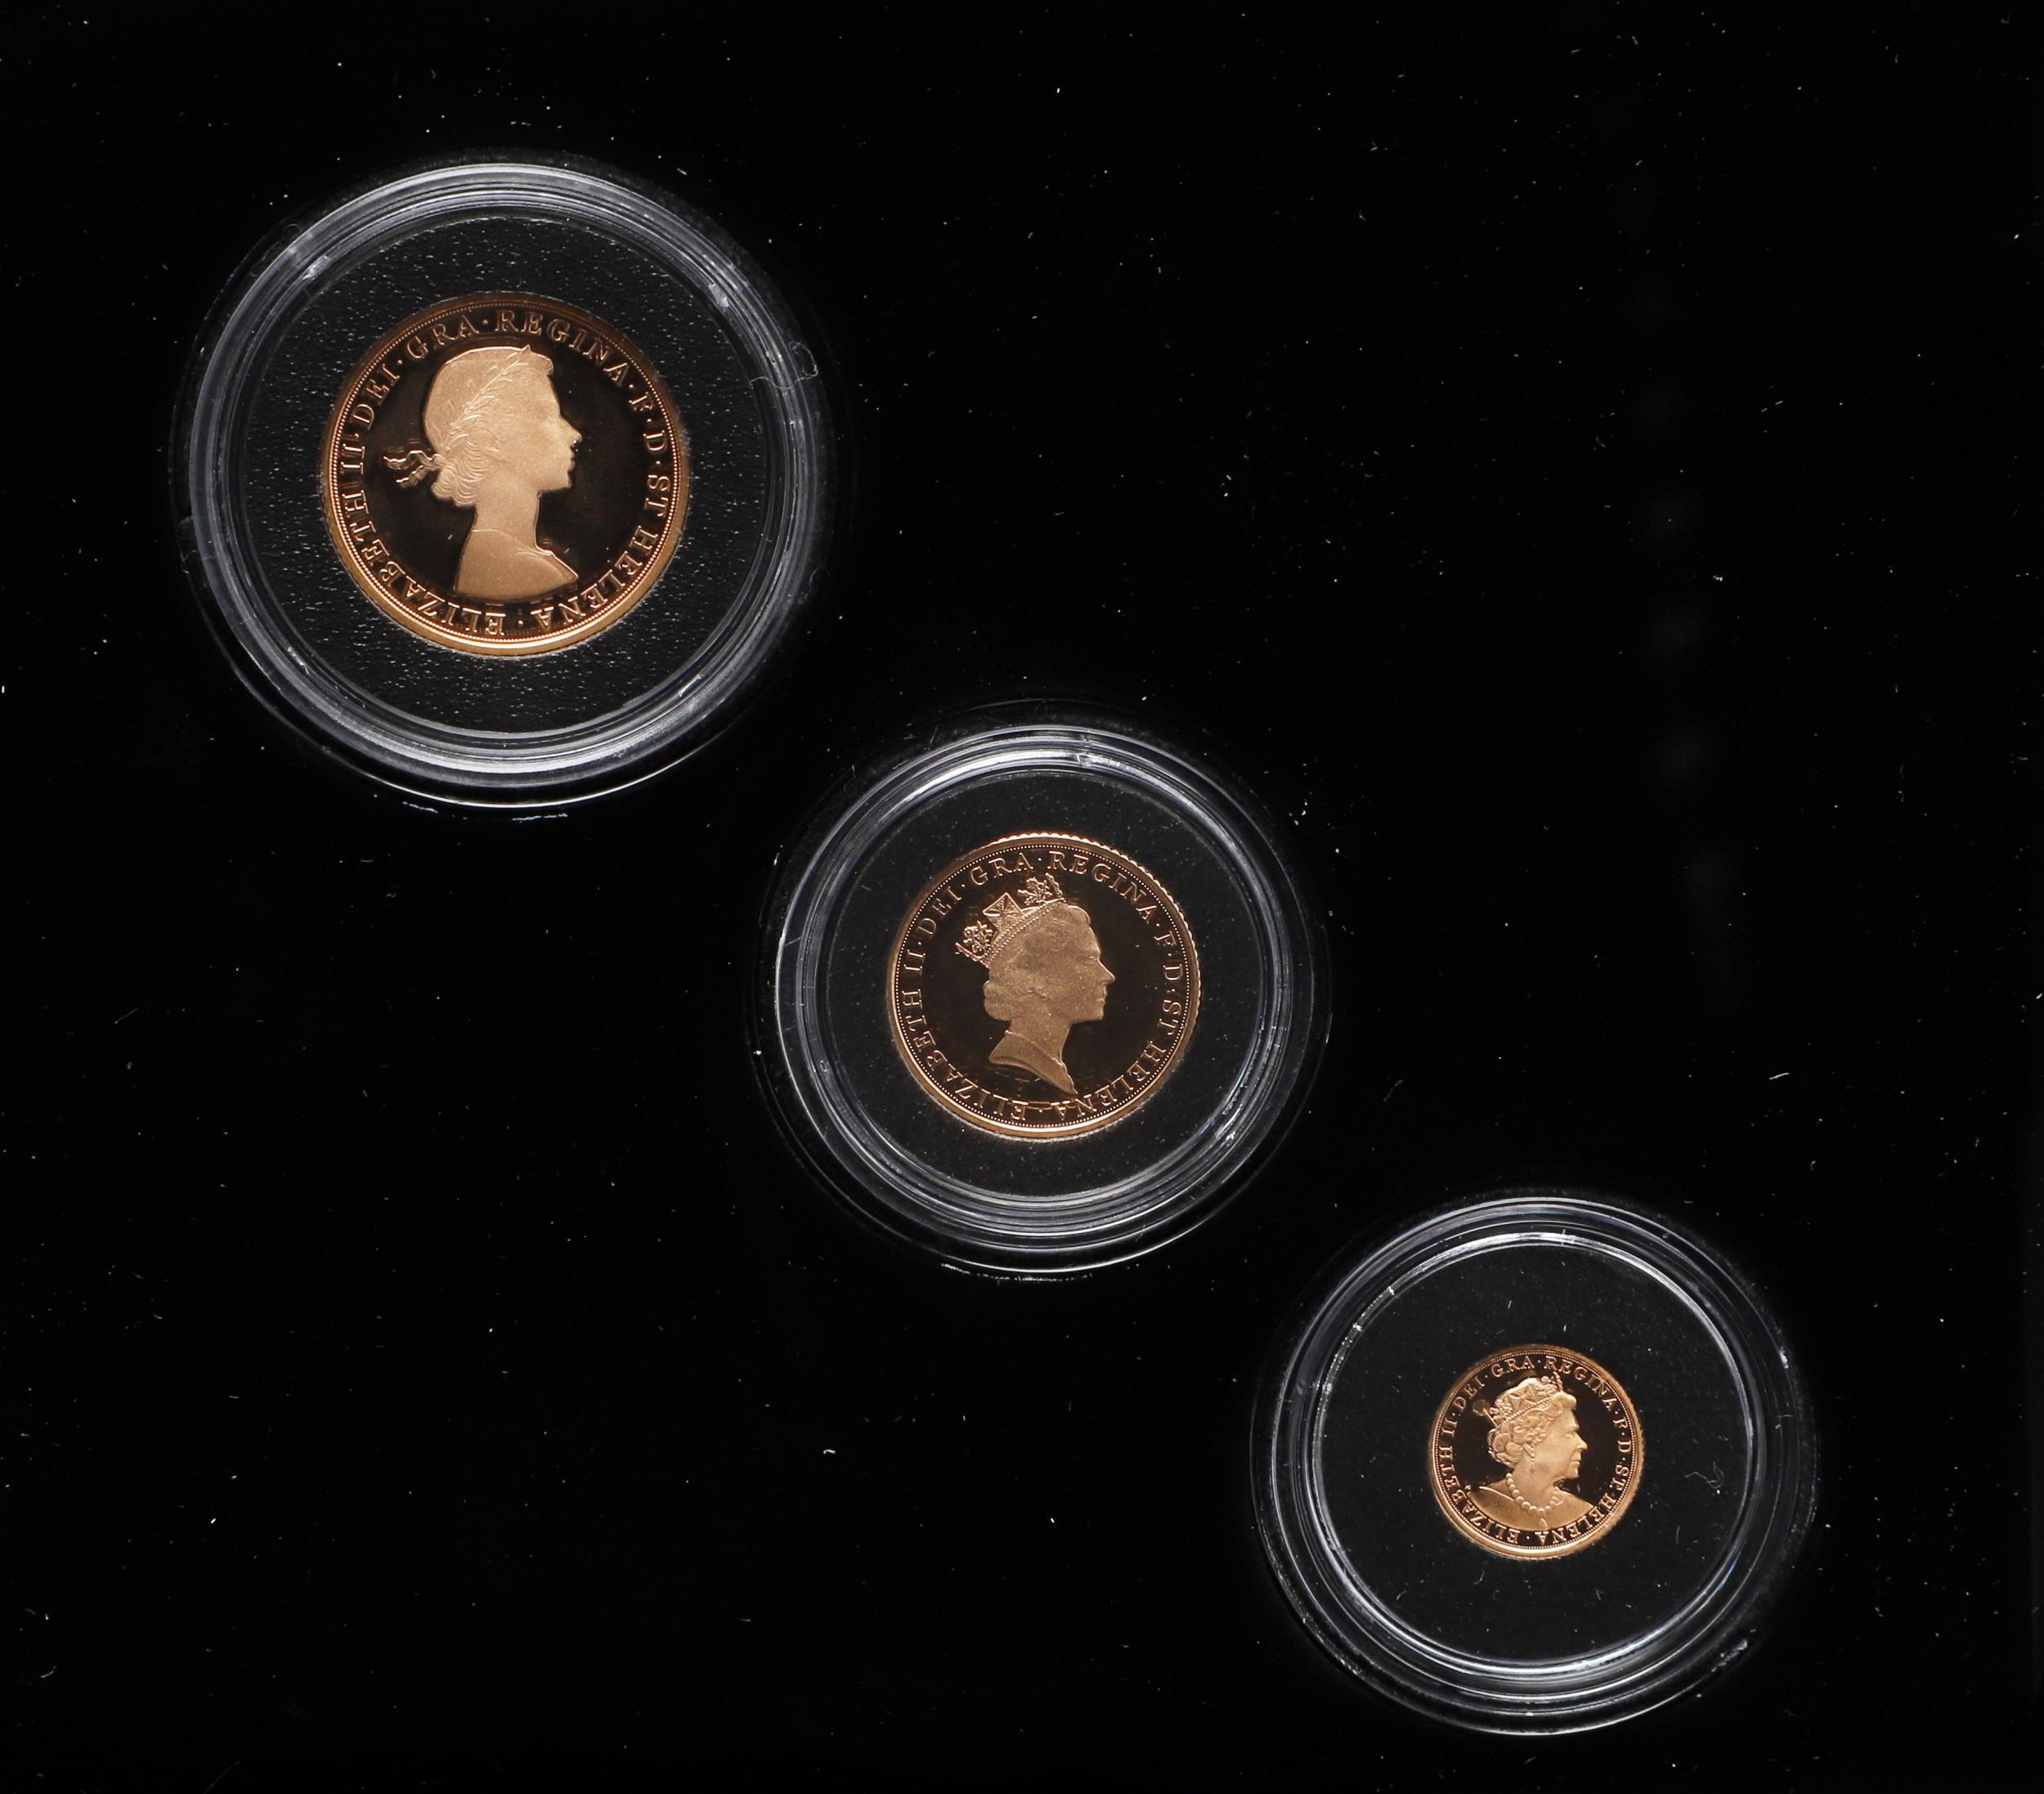 AN ELIZABETH II THREE COIN EAST INDIA COMPANY SOVEREIGN SET. 2021. - Image 2 of 8